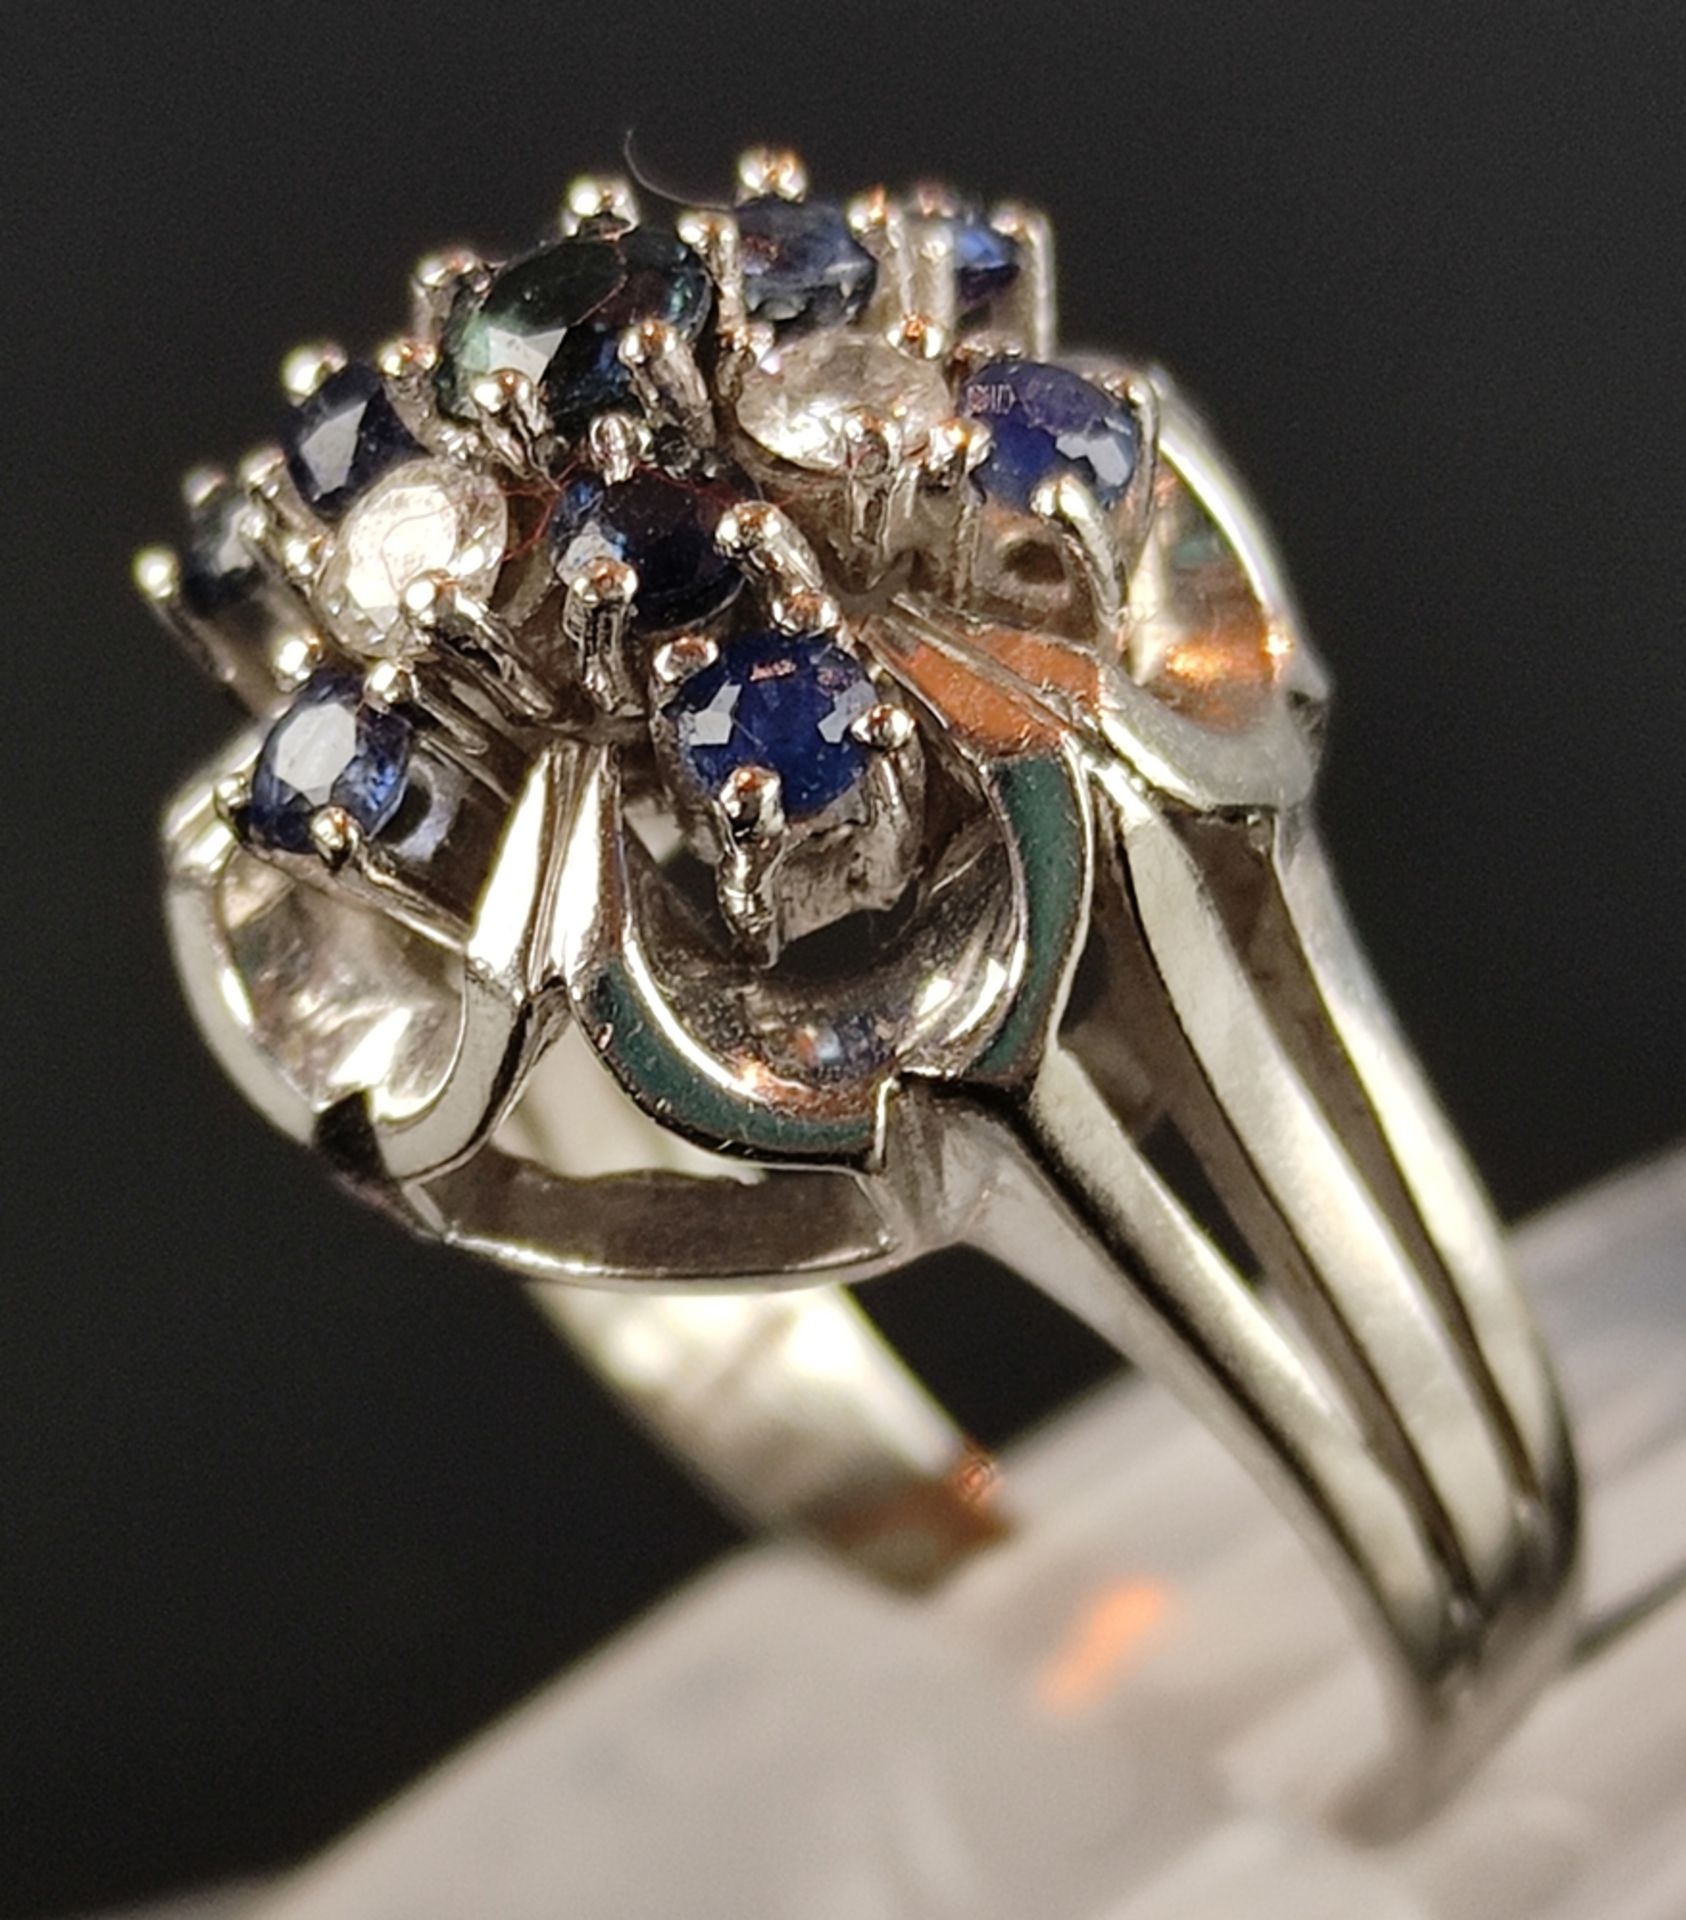 Diamond-sapphire-ring, with 10 sapphires and 3 diamonds, 585/14K white gold, 6.3g, size 48.5 - Image 5 of 6